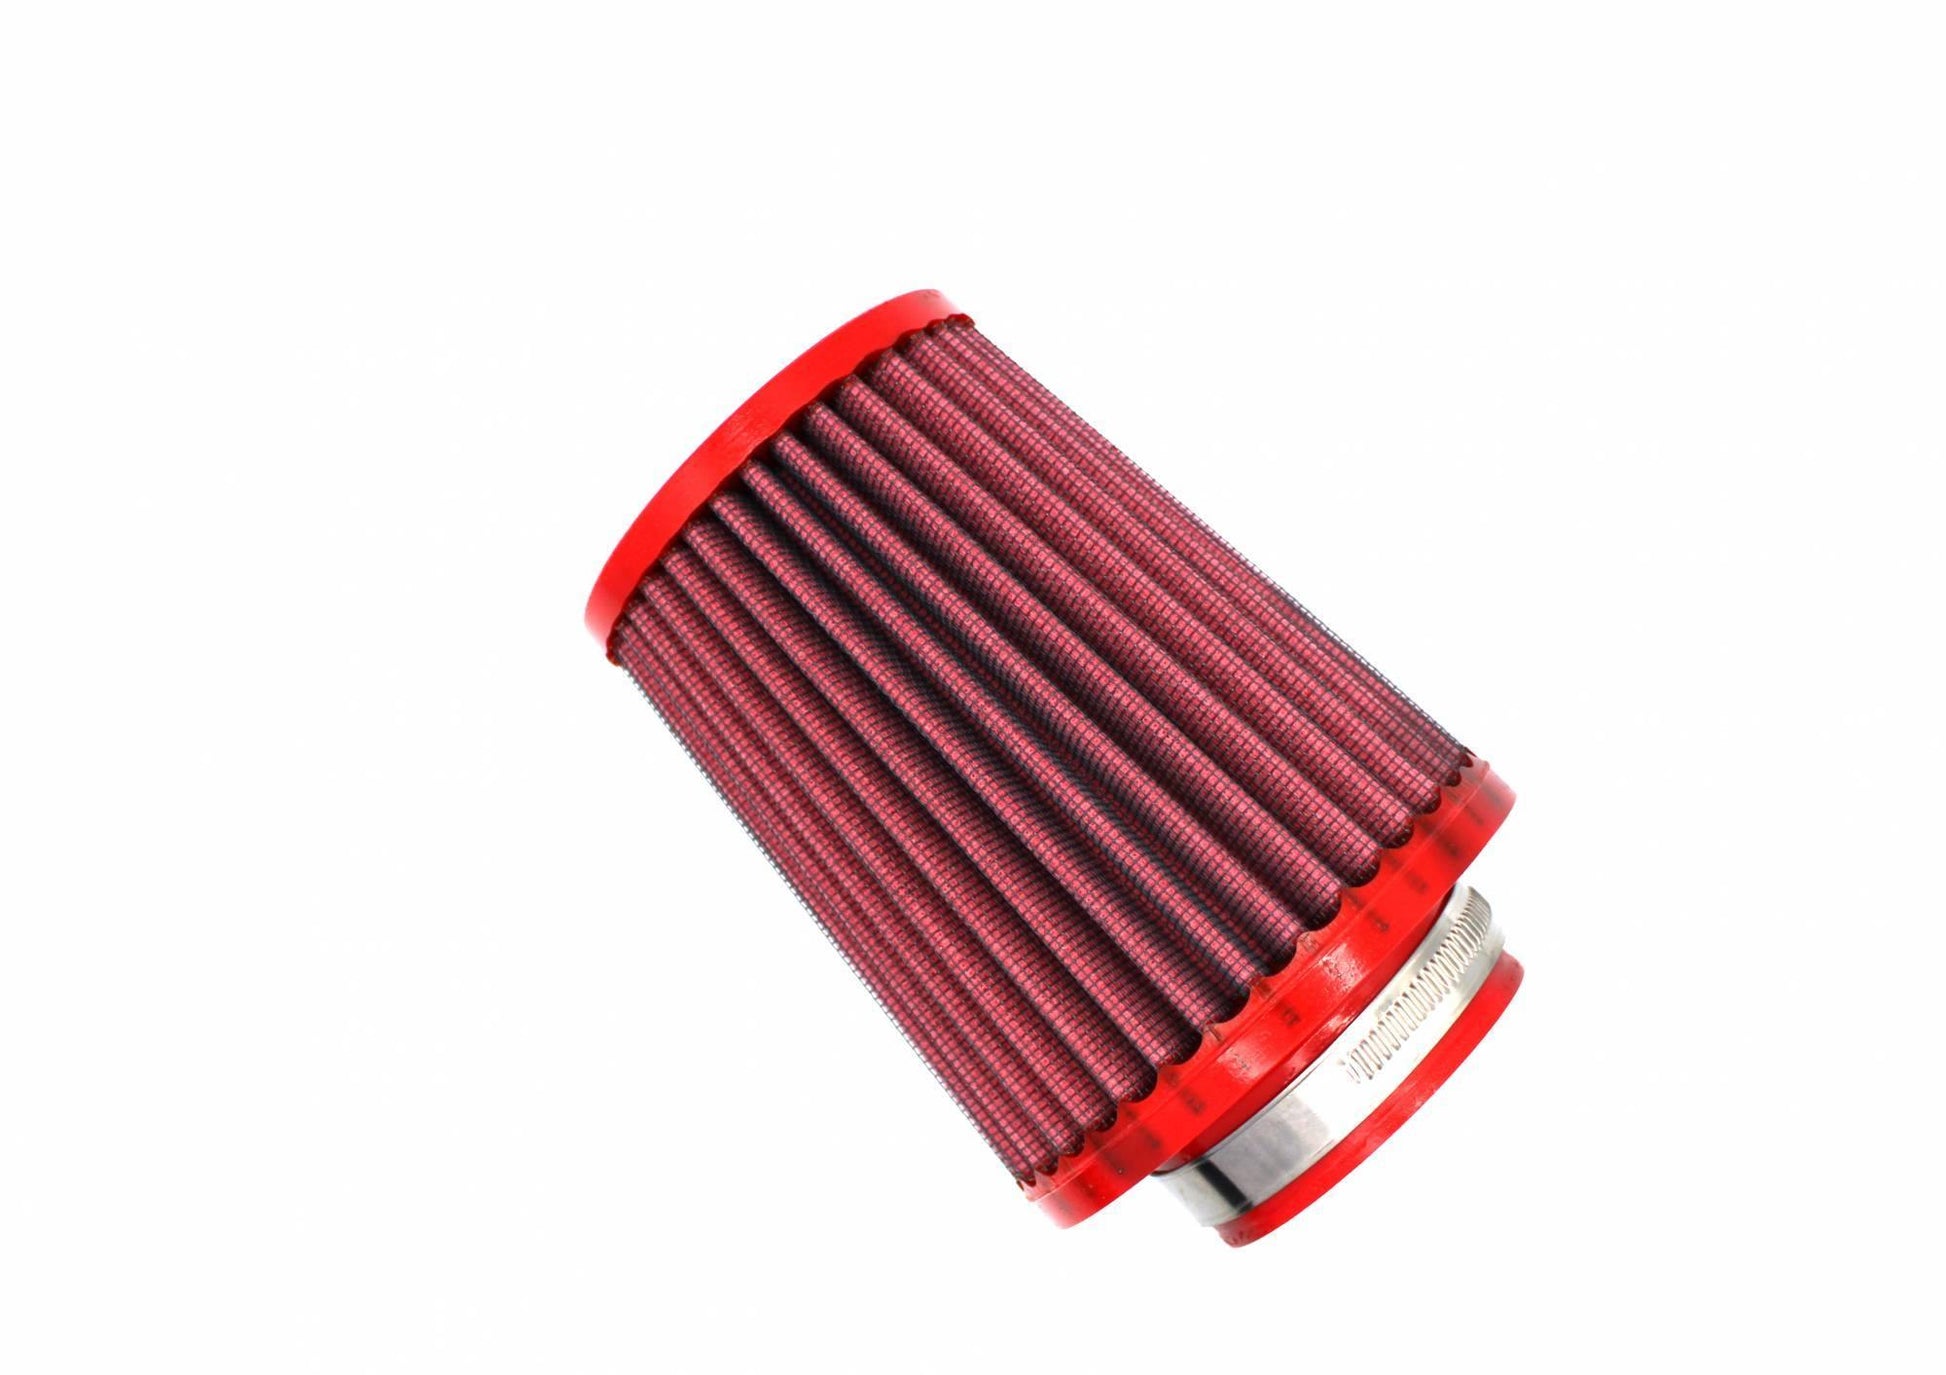 BMC Conical Single Air Filter for Direction Induction (Ø1 : 60 | Ø2 : 115 | L : 157) - Durian Bikers